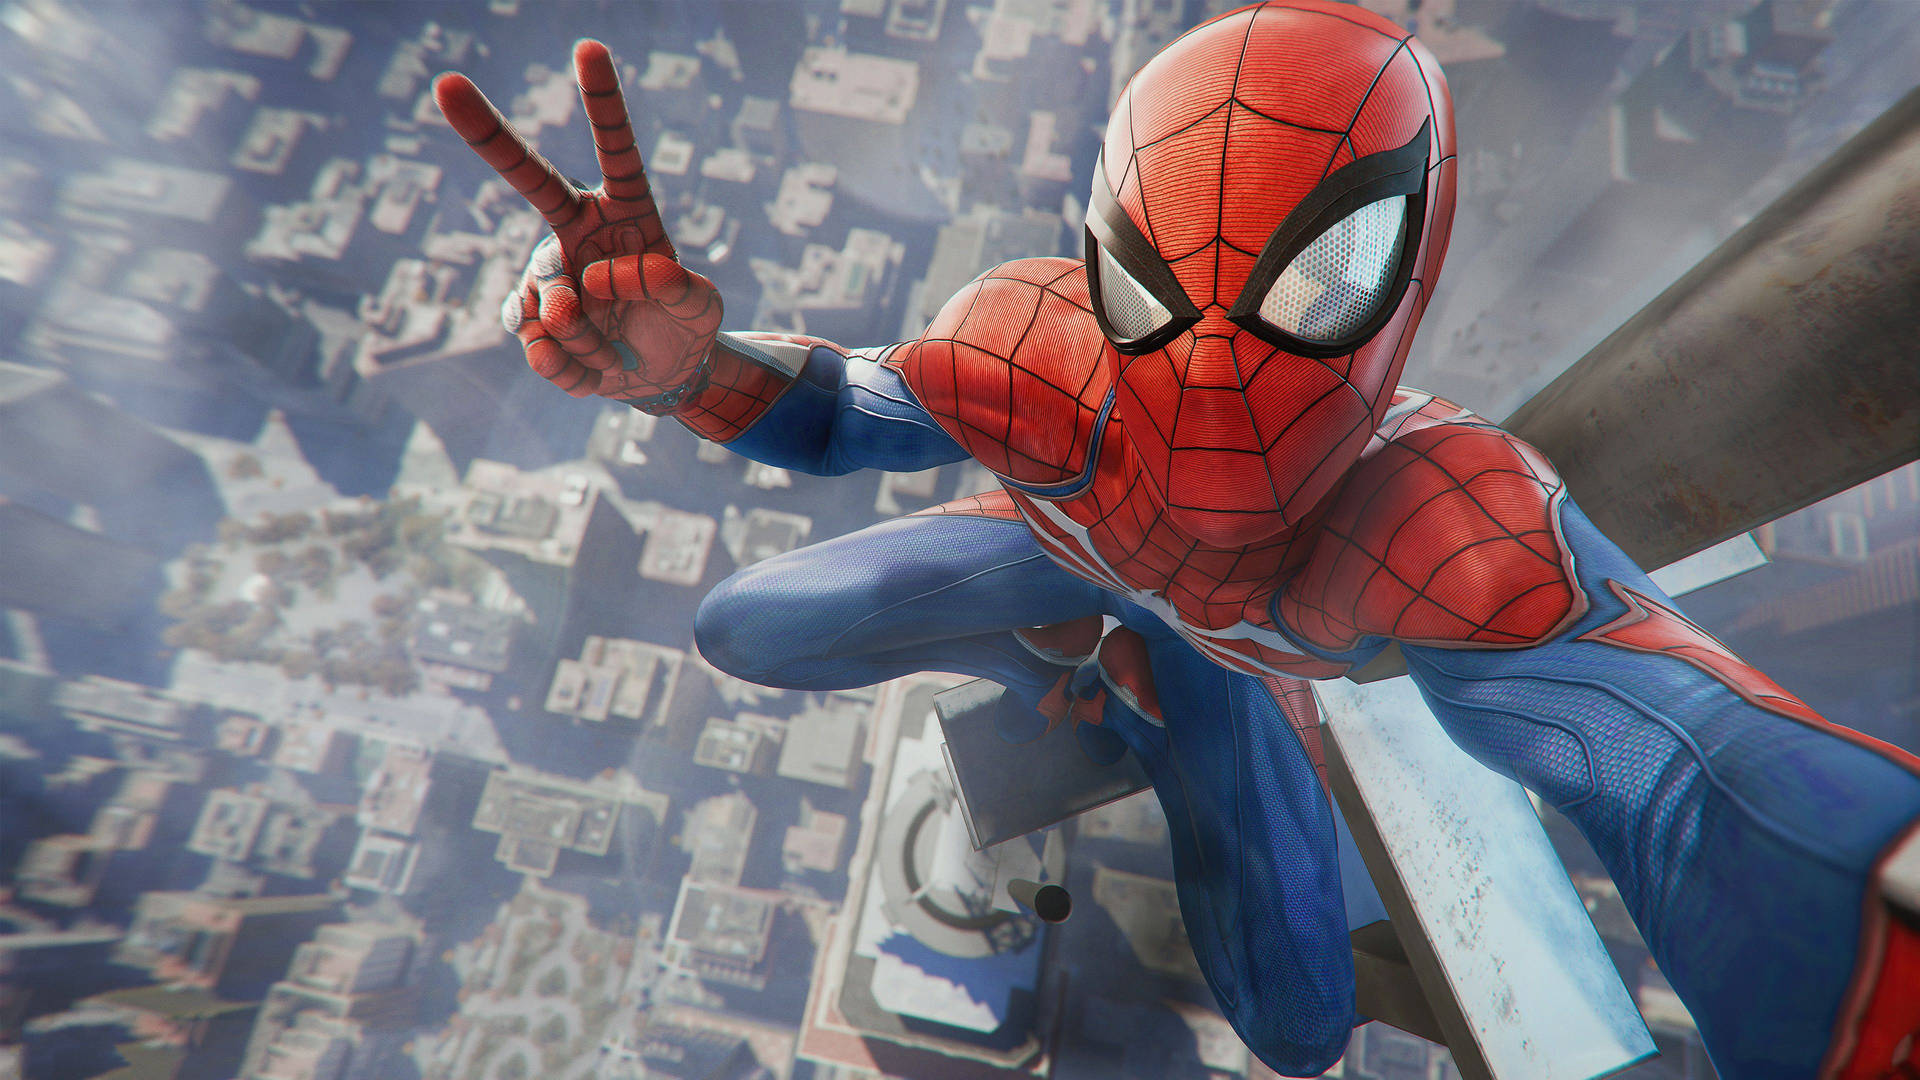 Spiderman on top of a building looking up and taking a selfie with a piece hand sign showing the top view of the city.